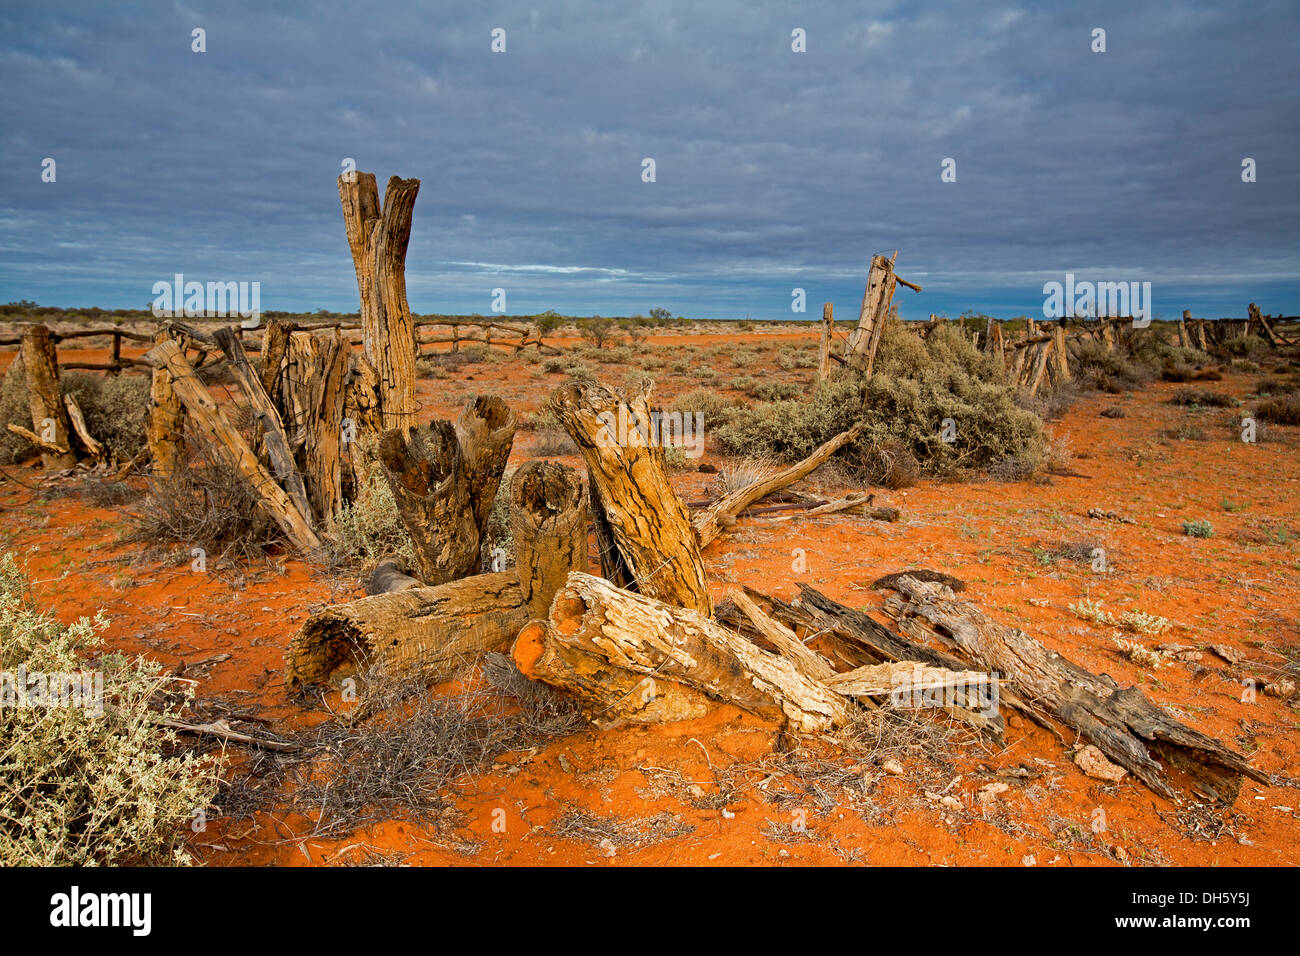 Outback landscape with ruins of historic stock yards on vast red plains stretching to distant horizon near Oodnadatta north SA Stock Photo